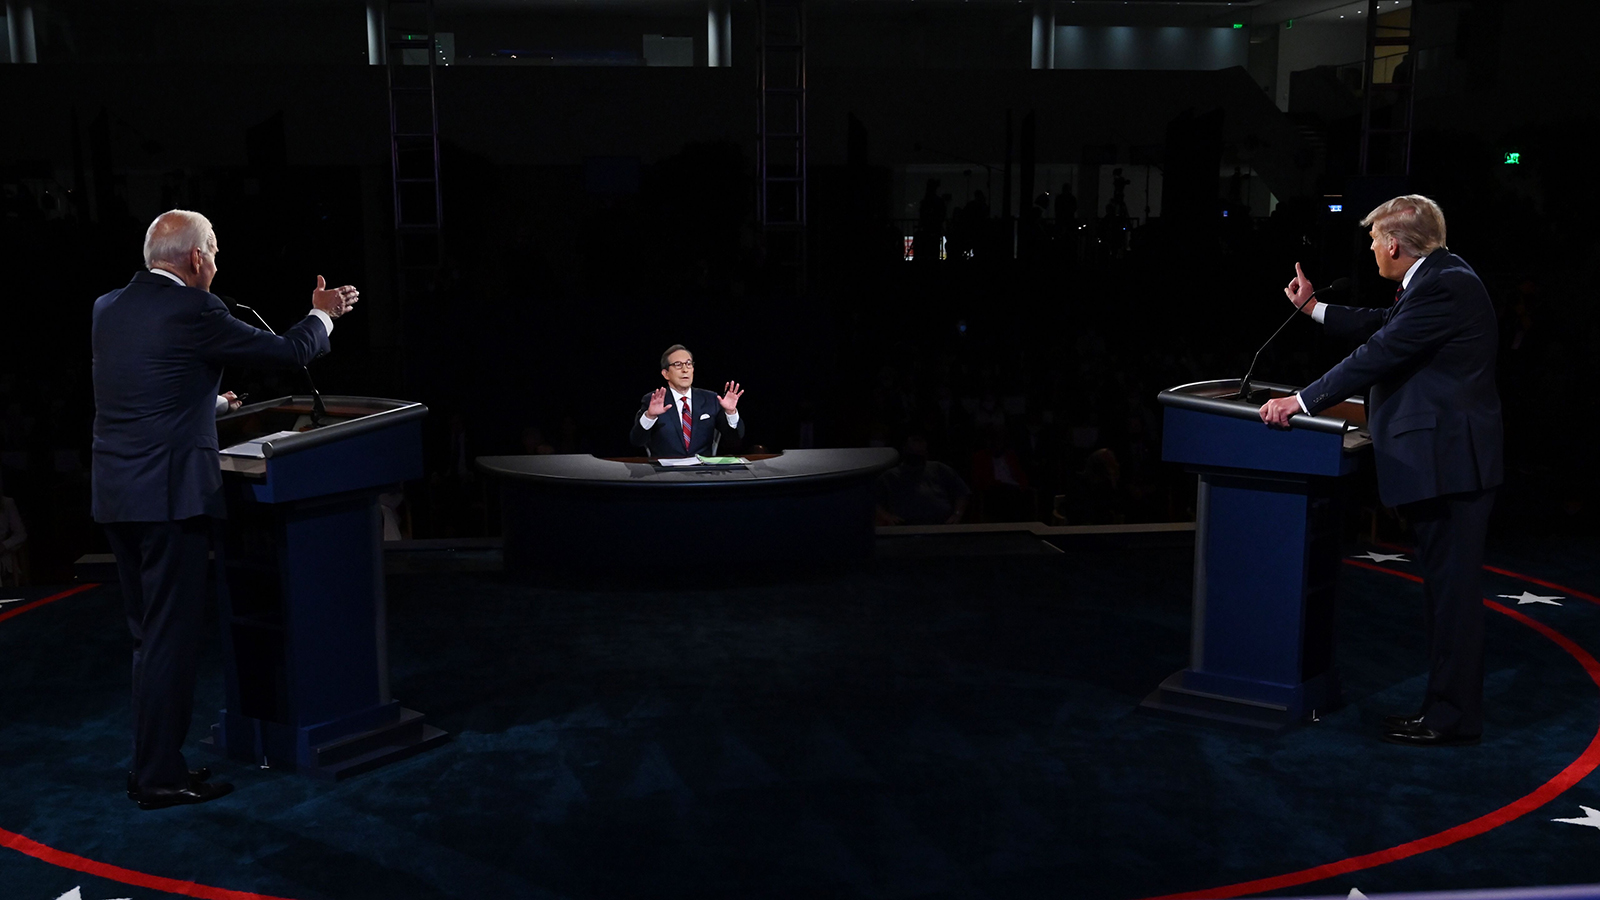 President Donald Trump and Democratic presidential candidate Joe Biden take part in the first presidential debate at Case Western Reserve University and Cleveland Clinic in Cleveland, Ohio, on September 29.